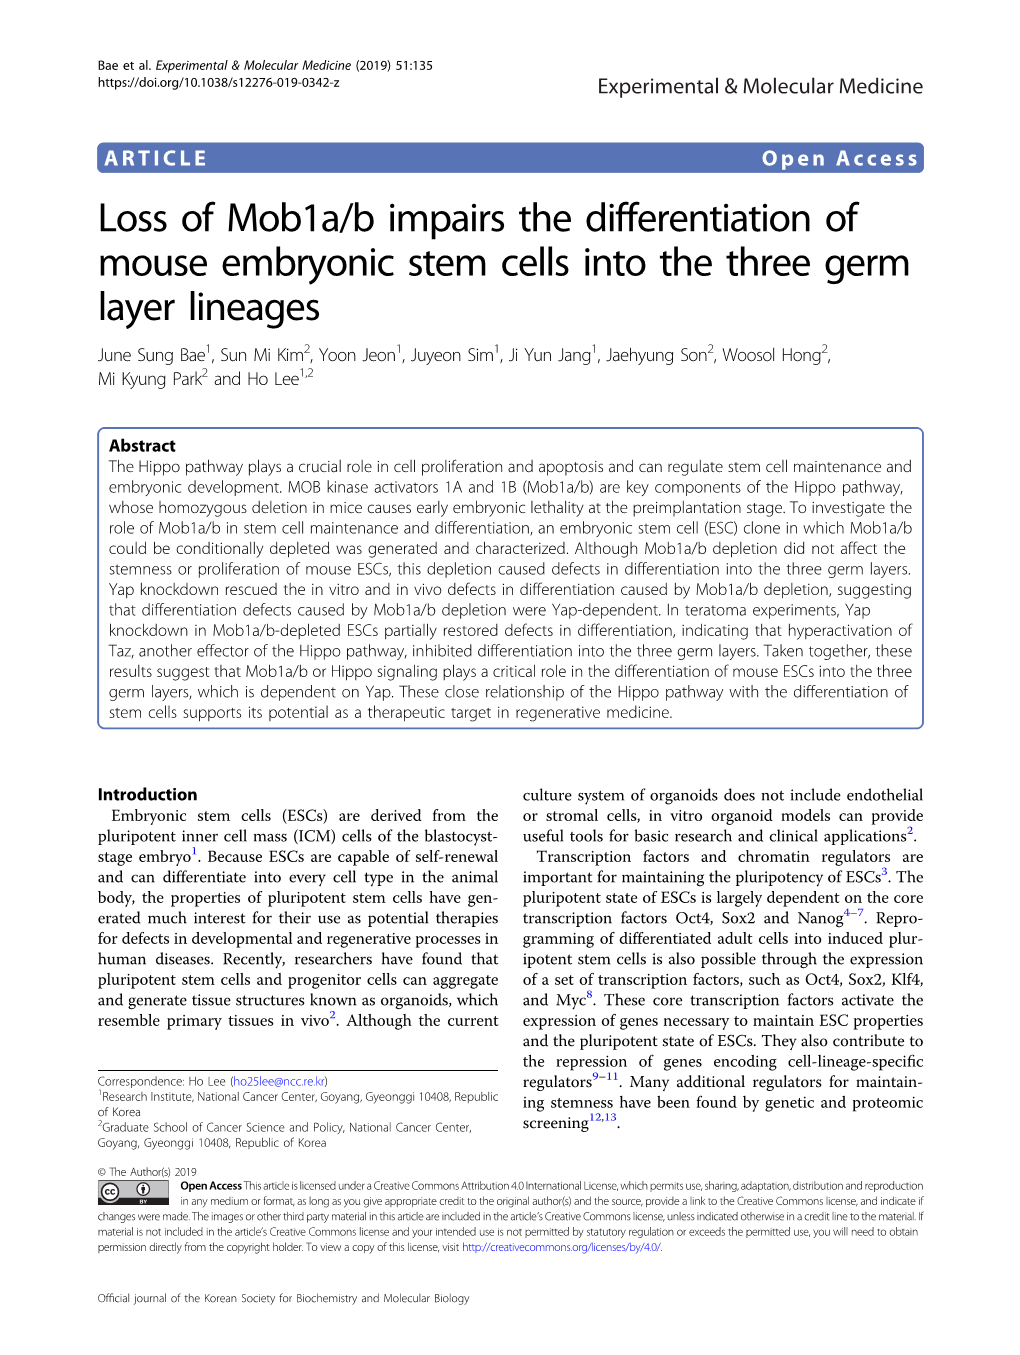 Loss of Mob1a/B Impairs the Differentiation of Mouse Embryonic